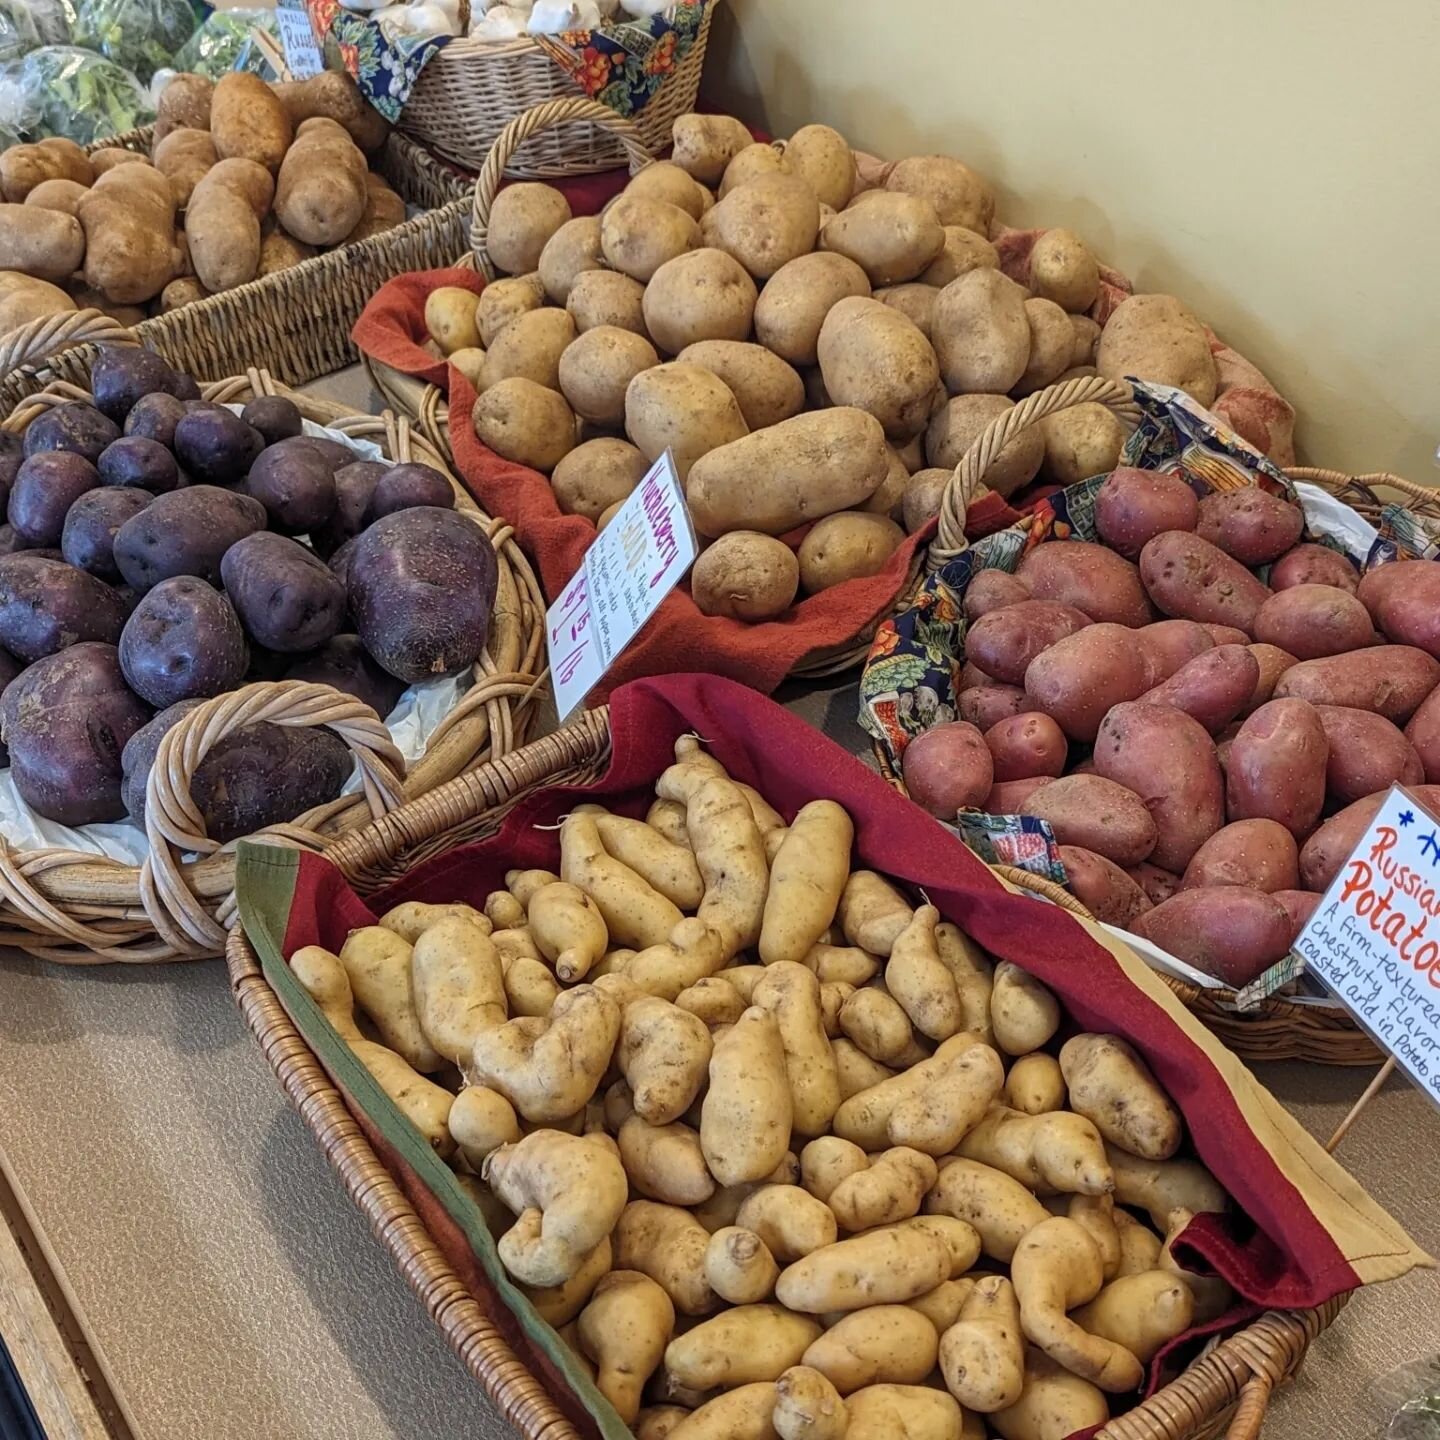 Fall is in full-swing at our farmstand. The variety of produce we have available is stunning: four different varieties of potatoes, five different picked apples (4 for u-pick), 7+ winter squash varieties, pears, carrots, brussels sprouts, broccolini,